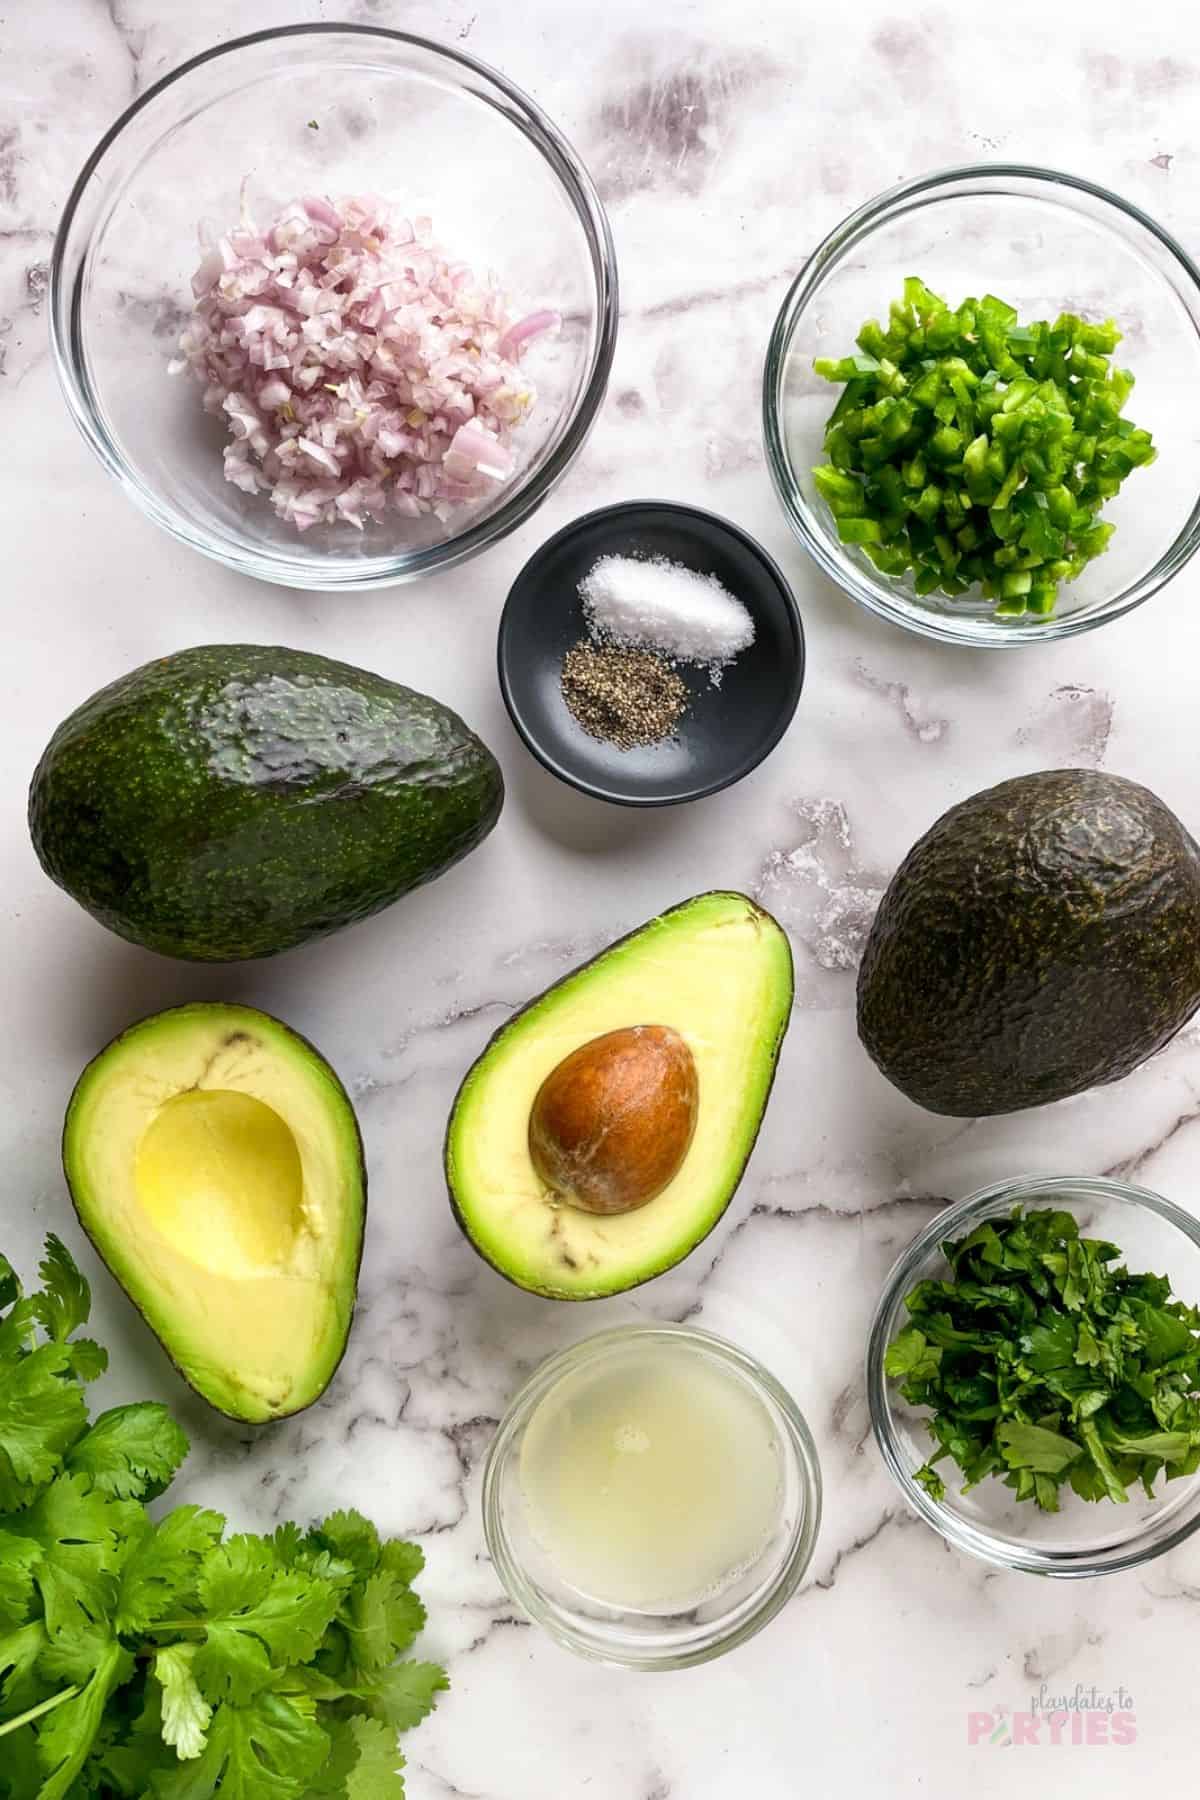 Ingredients on a marble surface include avocado, cilantro, shallot, jalapeno, salt, and pepper.